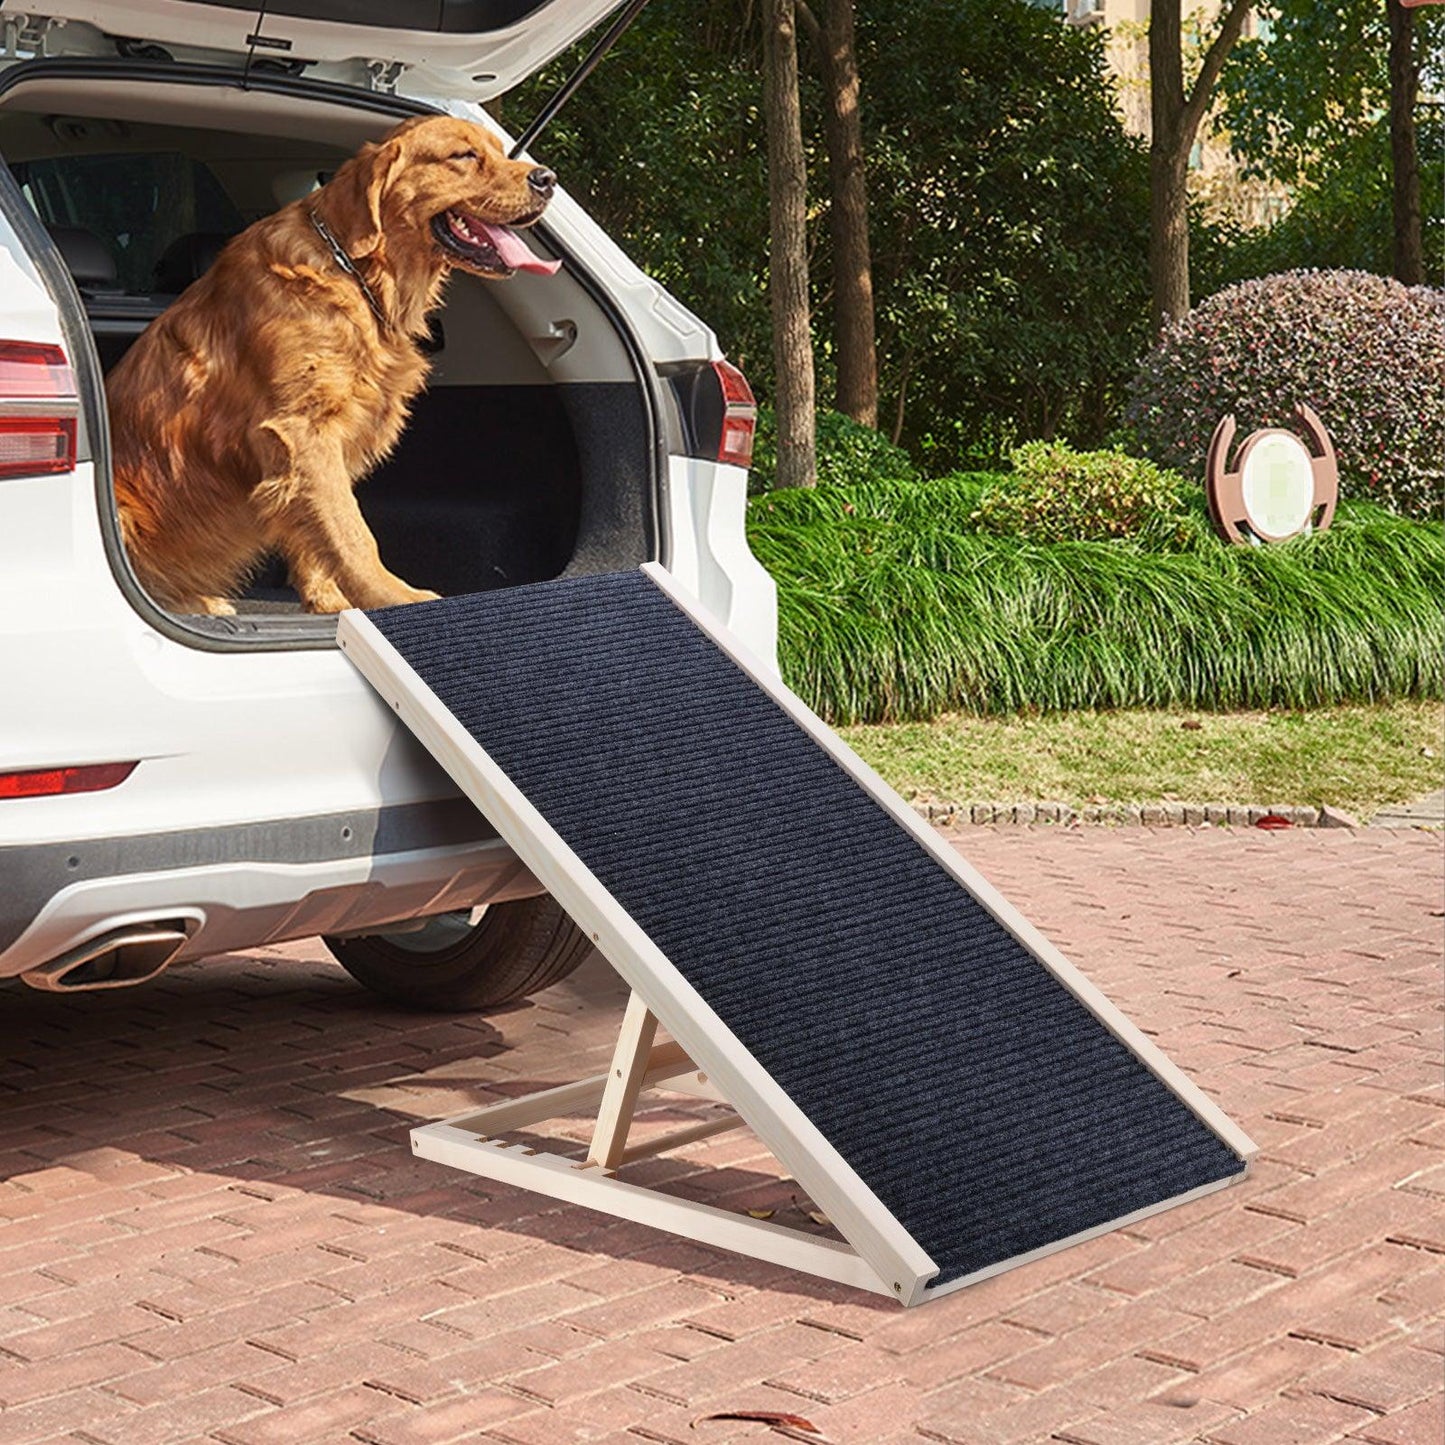 Large Dog sitting in the trunk of a car and a wooden dog ramp leaning on the trunk